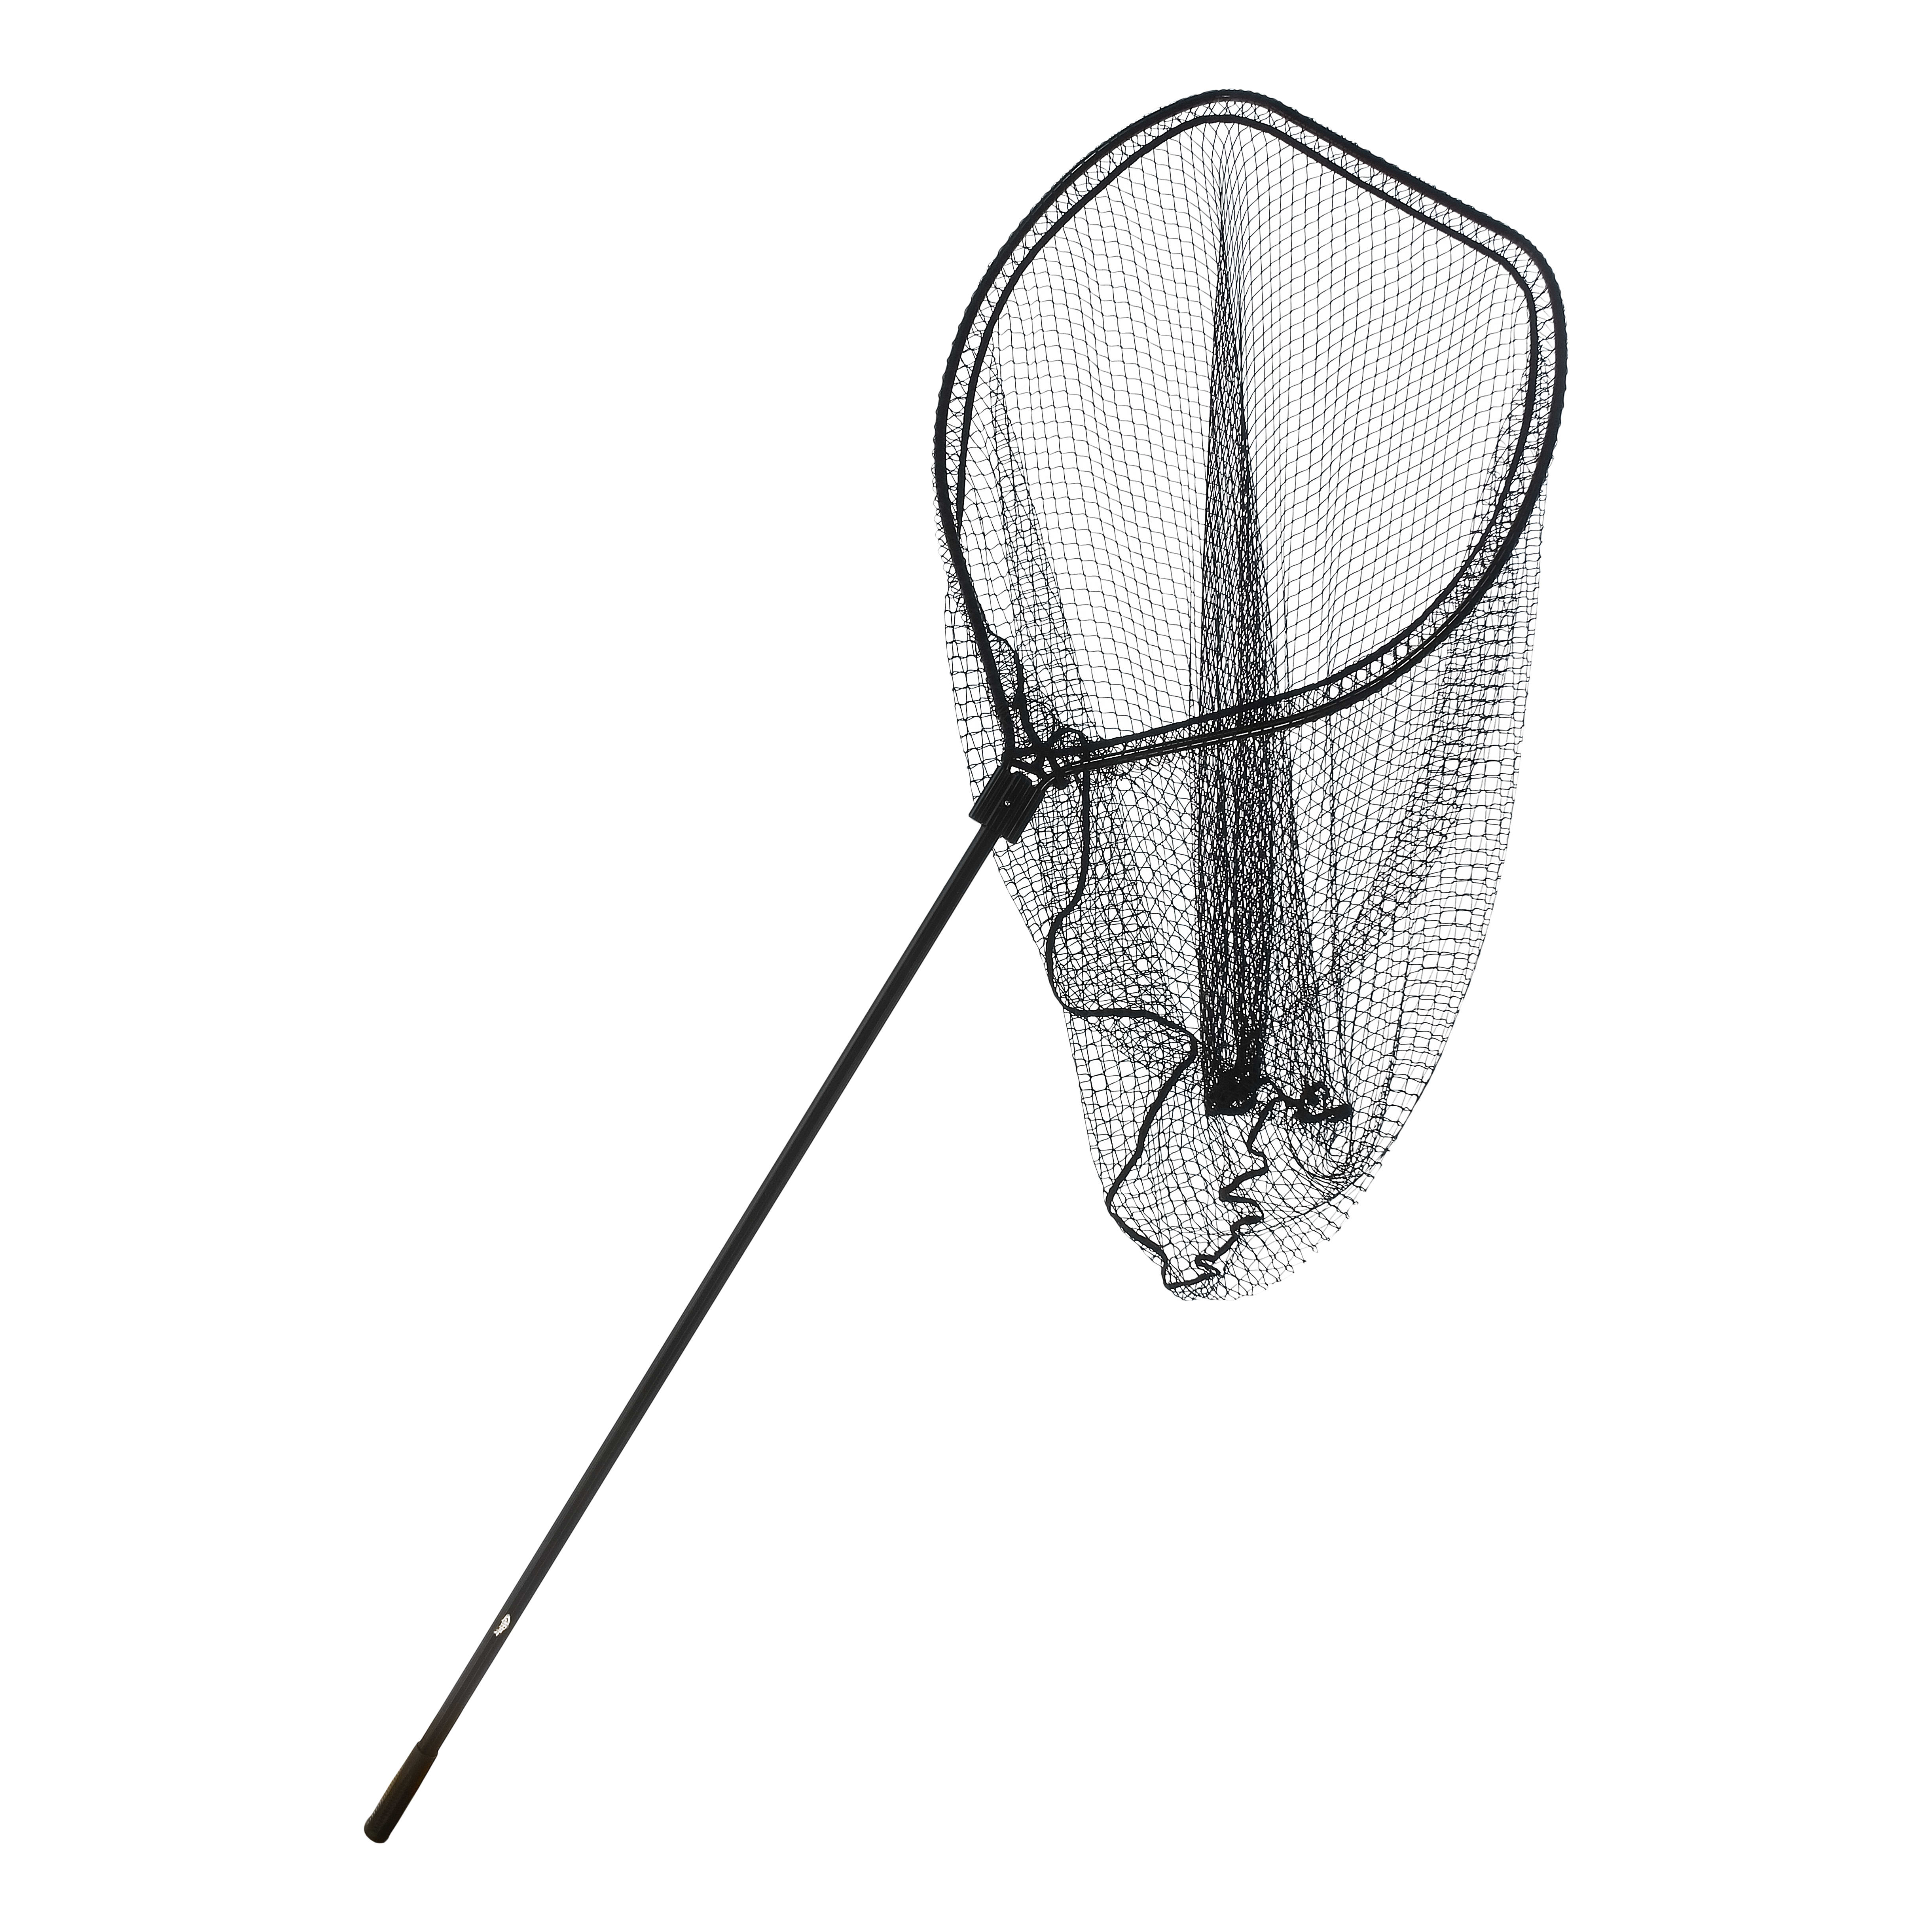 EGO Fishing S2 Compact Net 72010 , $10.00 Off with Free S&H